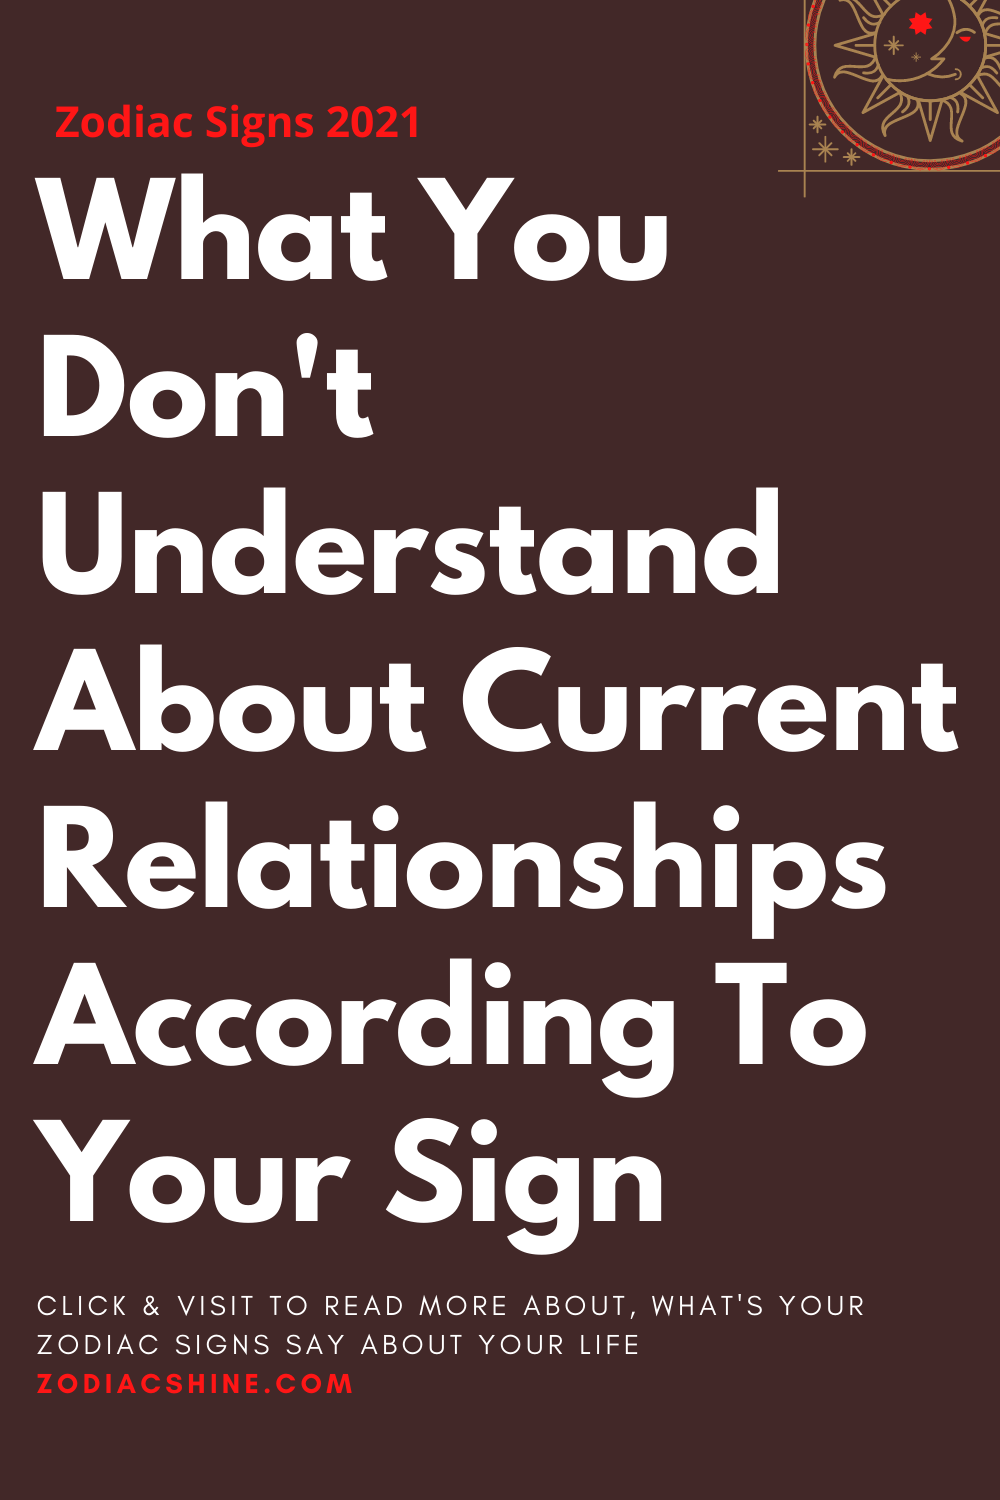 What You Don't Understand About Current Relationships According To Your Sign